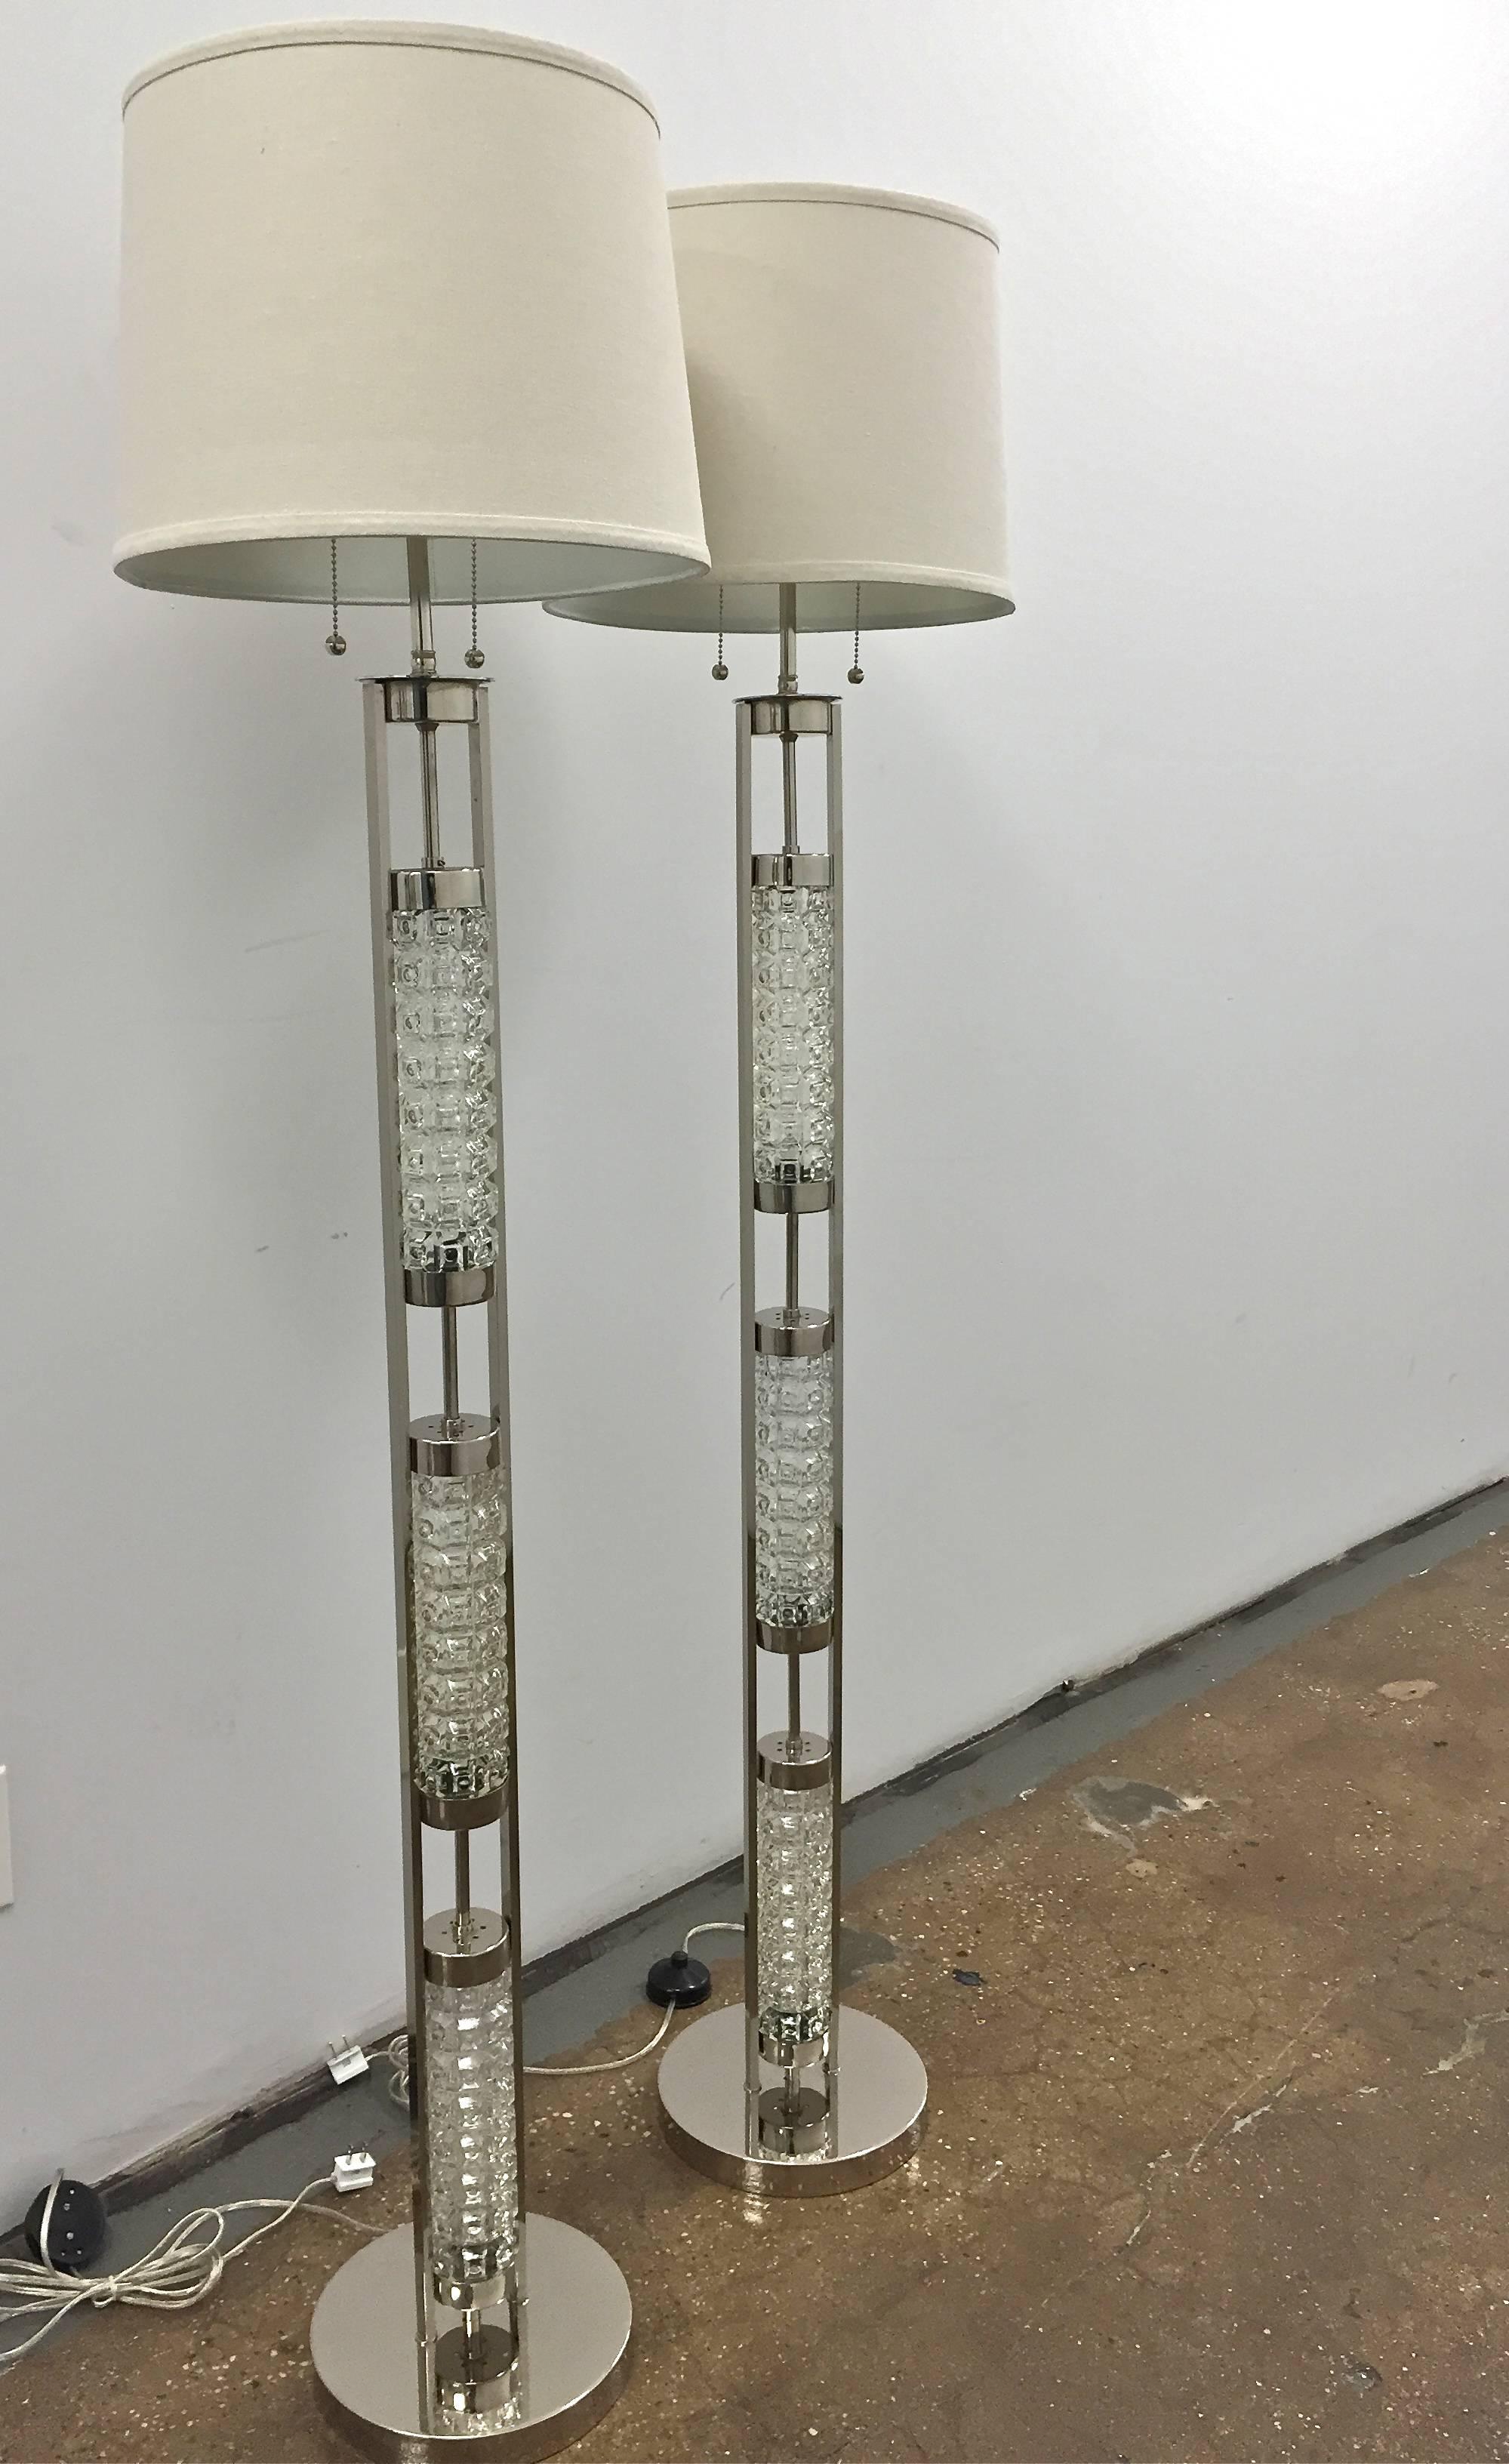 A pair of vintage Scandinavian floor lamps is the Orrefors style.
Textured clear glass and polished metal. Newly restored and rewired, ready for use. The shades not included.